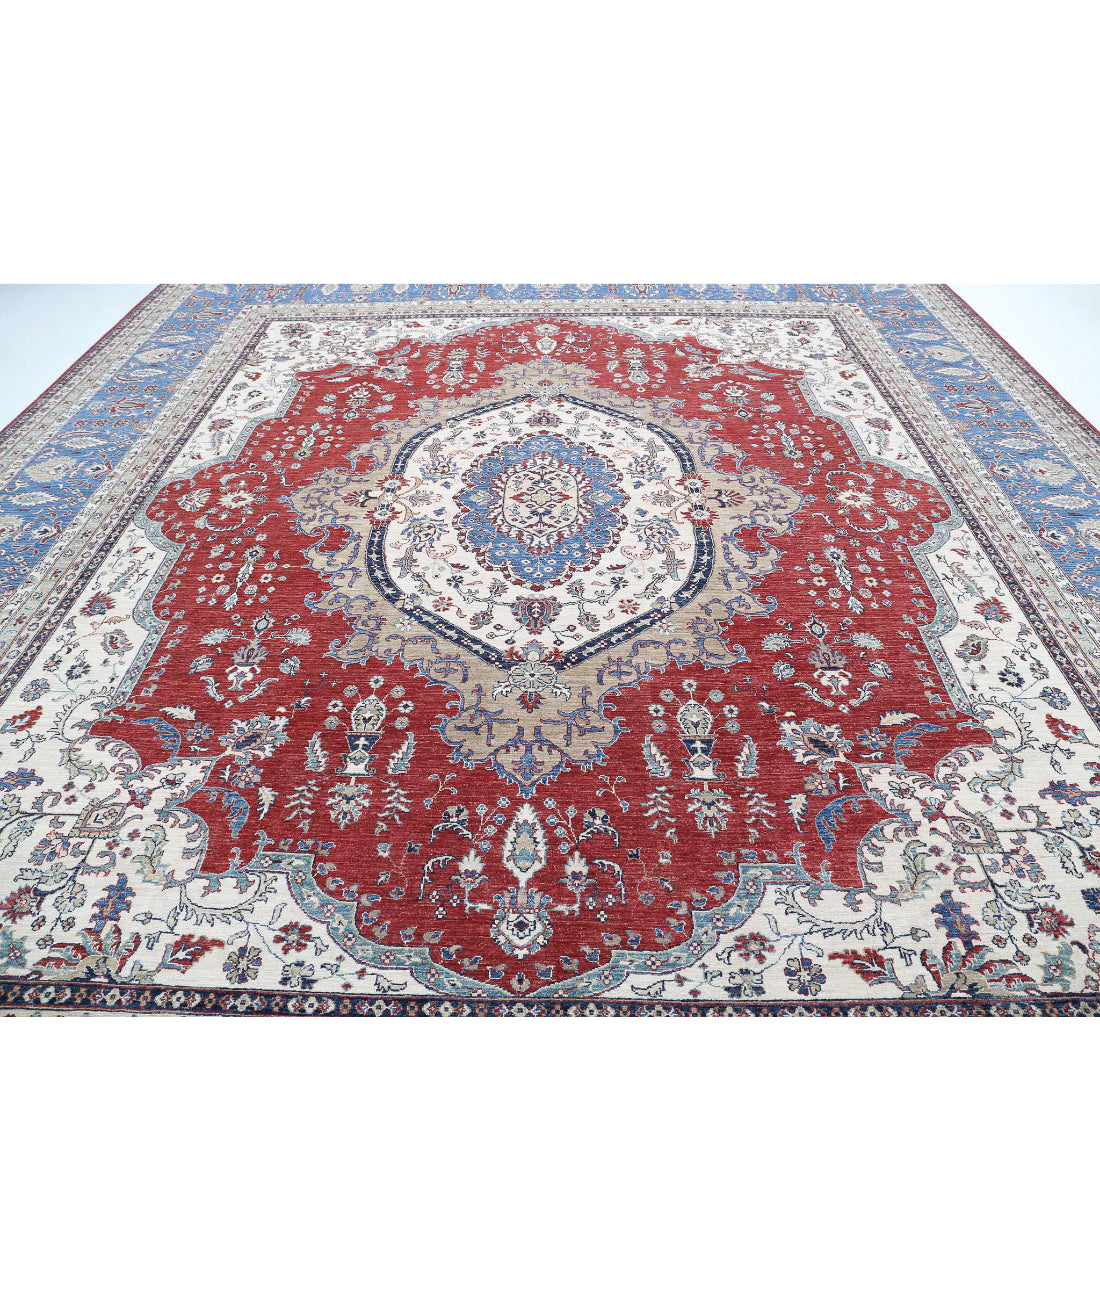 Heriz 14'0'' X 15'7'' Hand-Knotted Wool Rug 14'0'' x 15'7'' (420 X 468) / Red / Blue